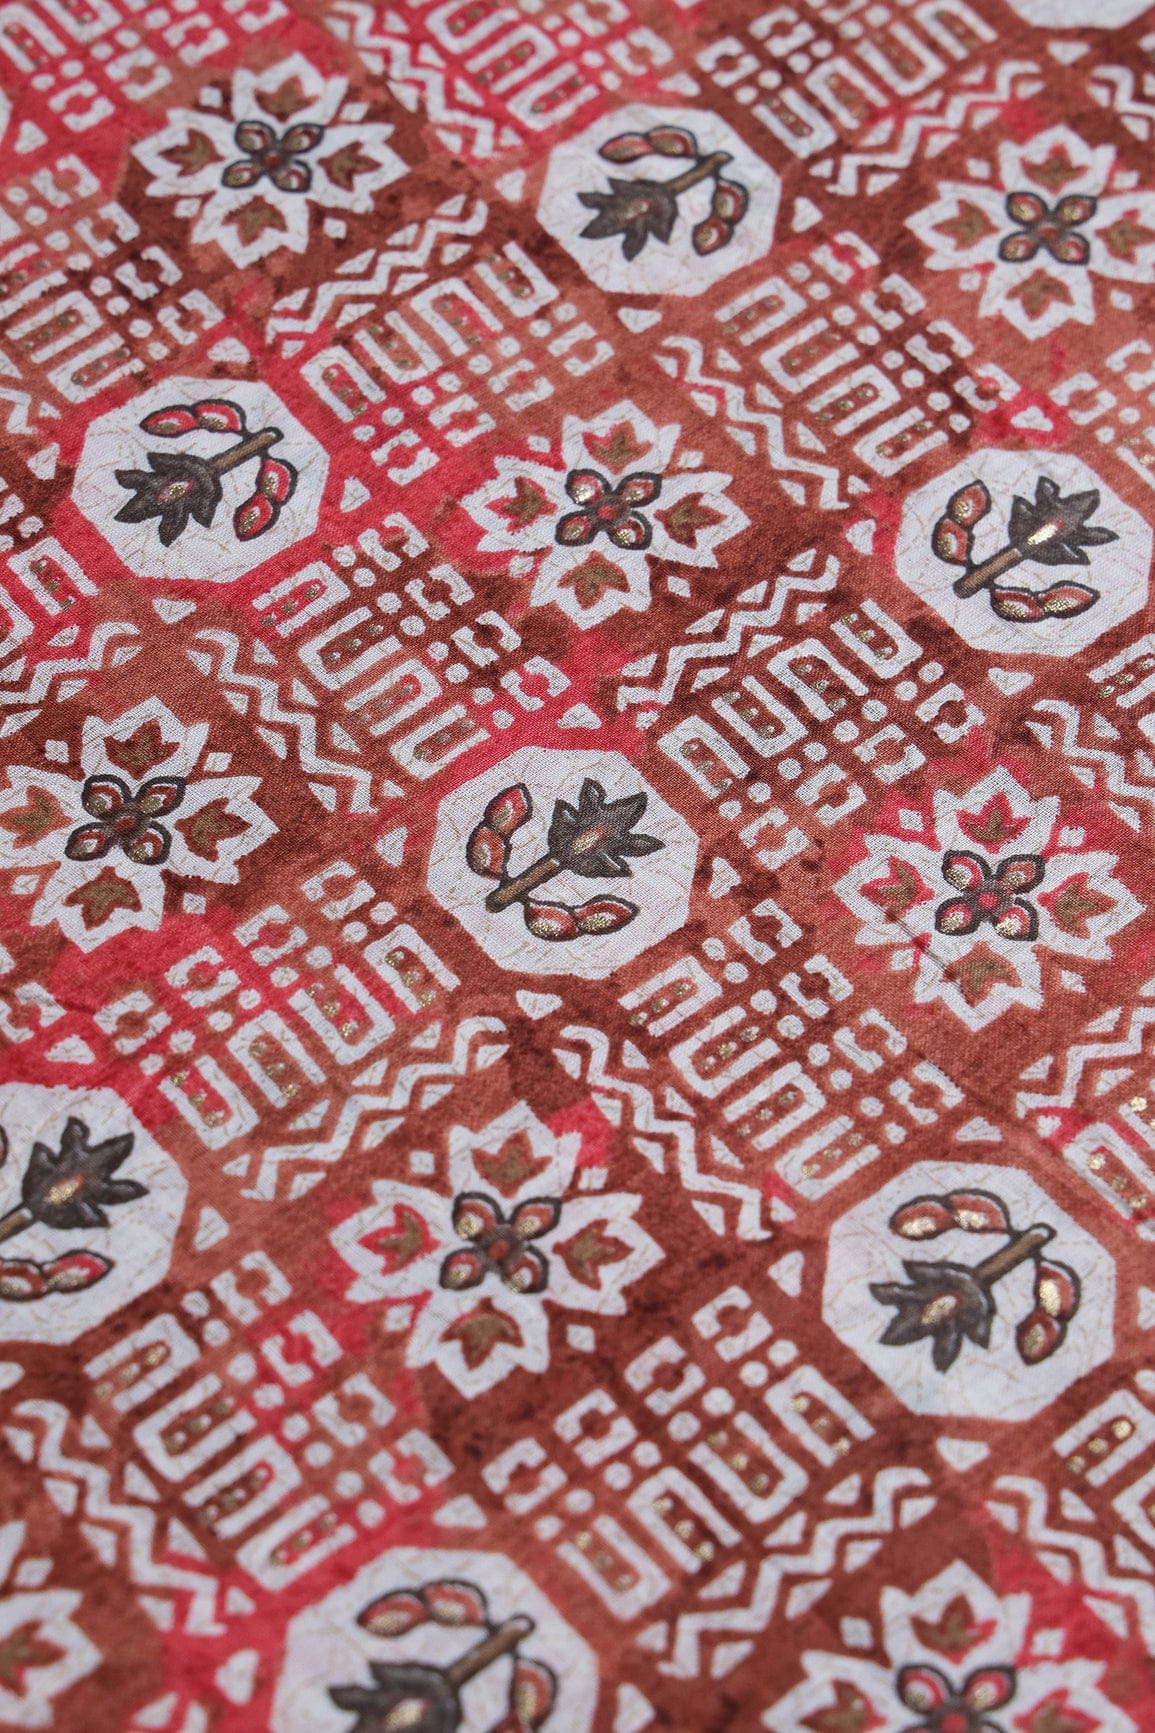 Brown And White Color Geometric Foil Print On Pure Mul Cotton Fabric - doeraa